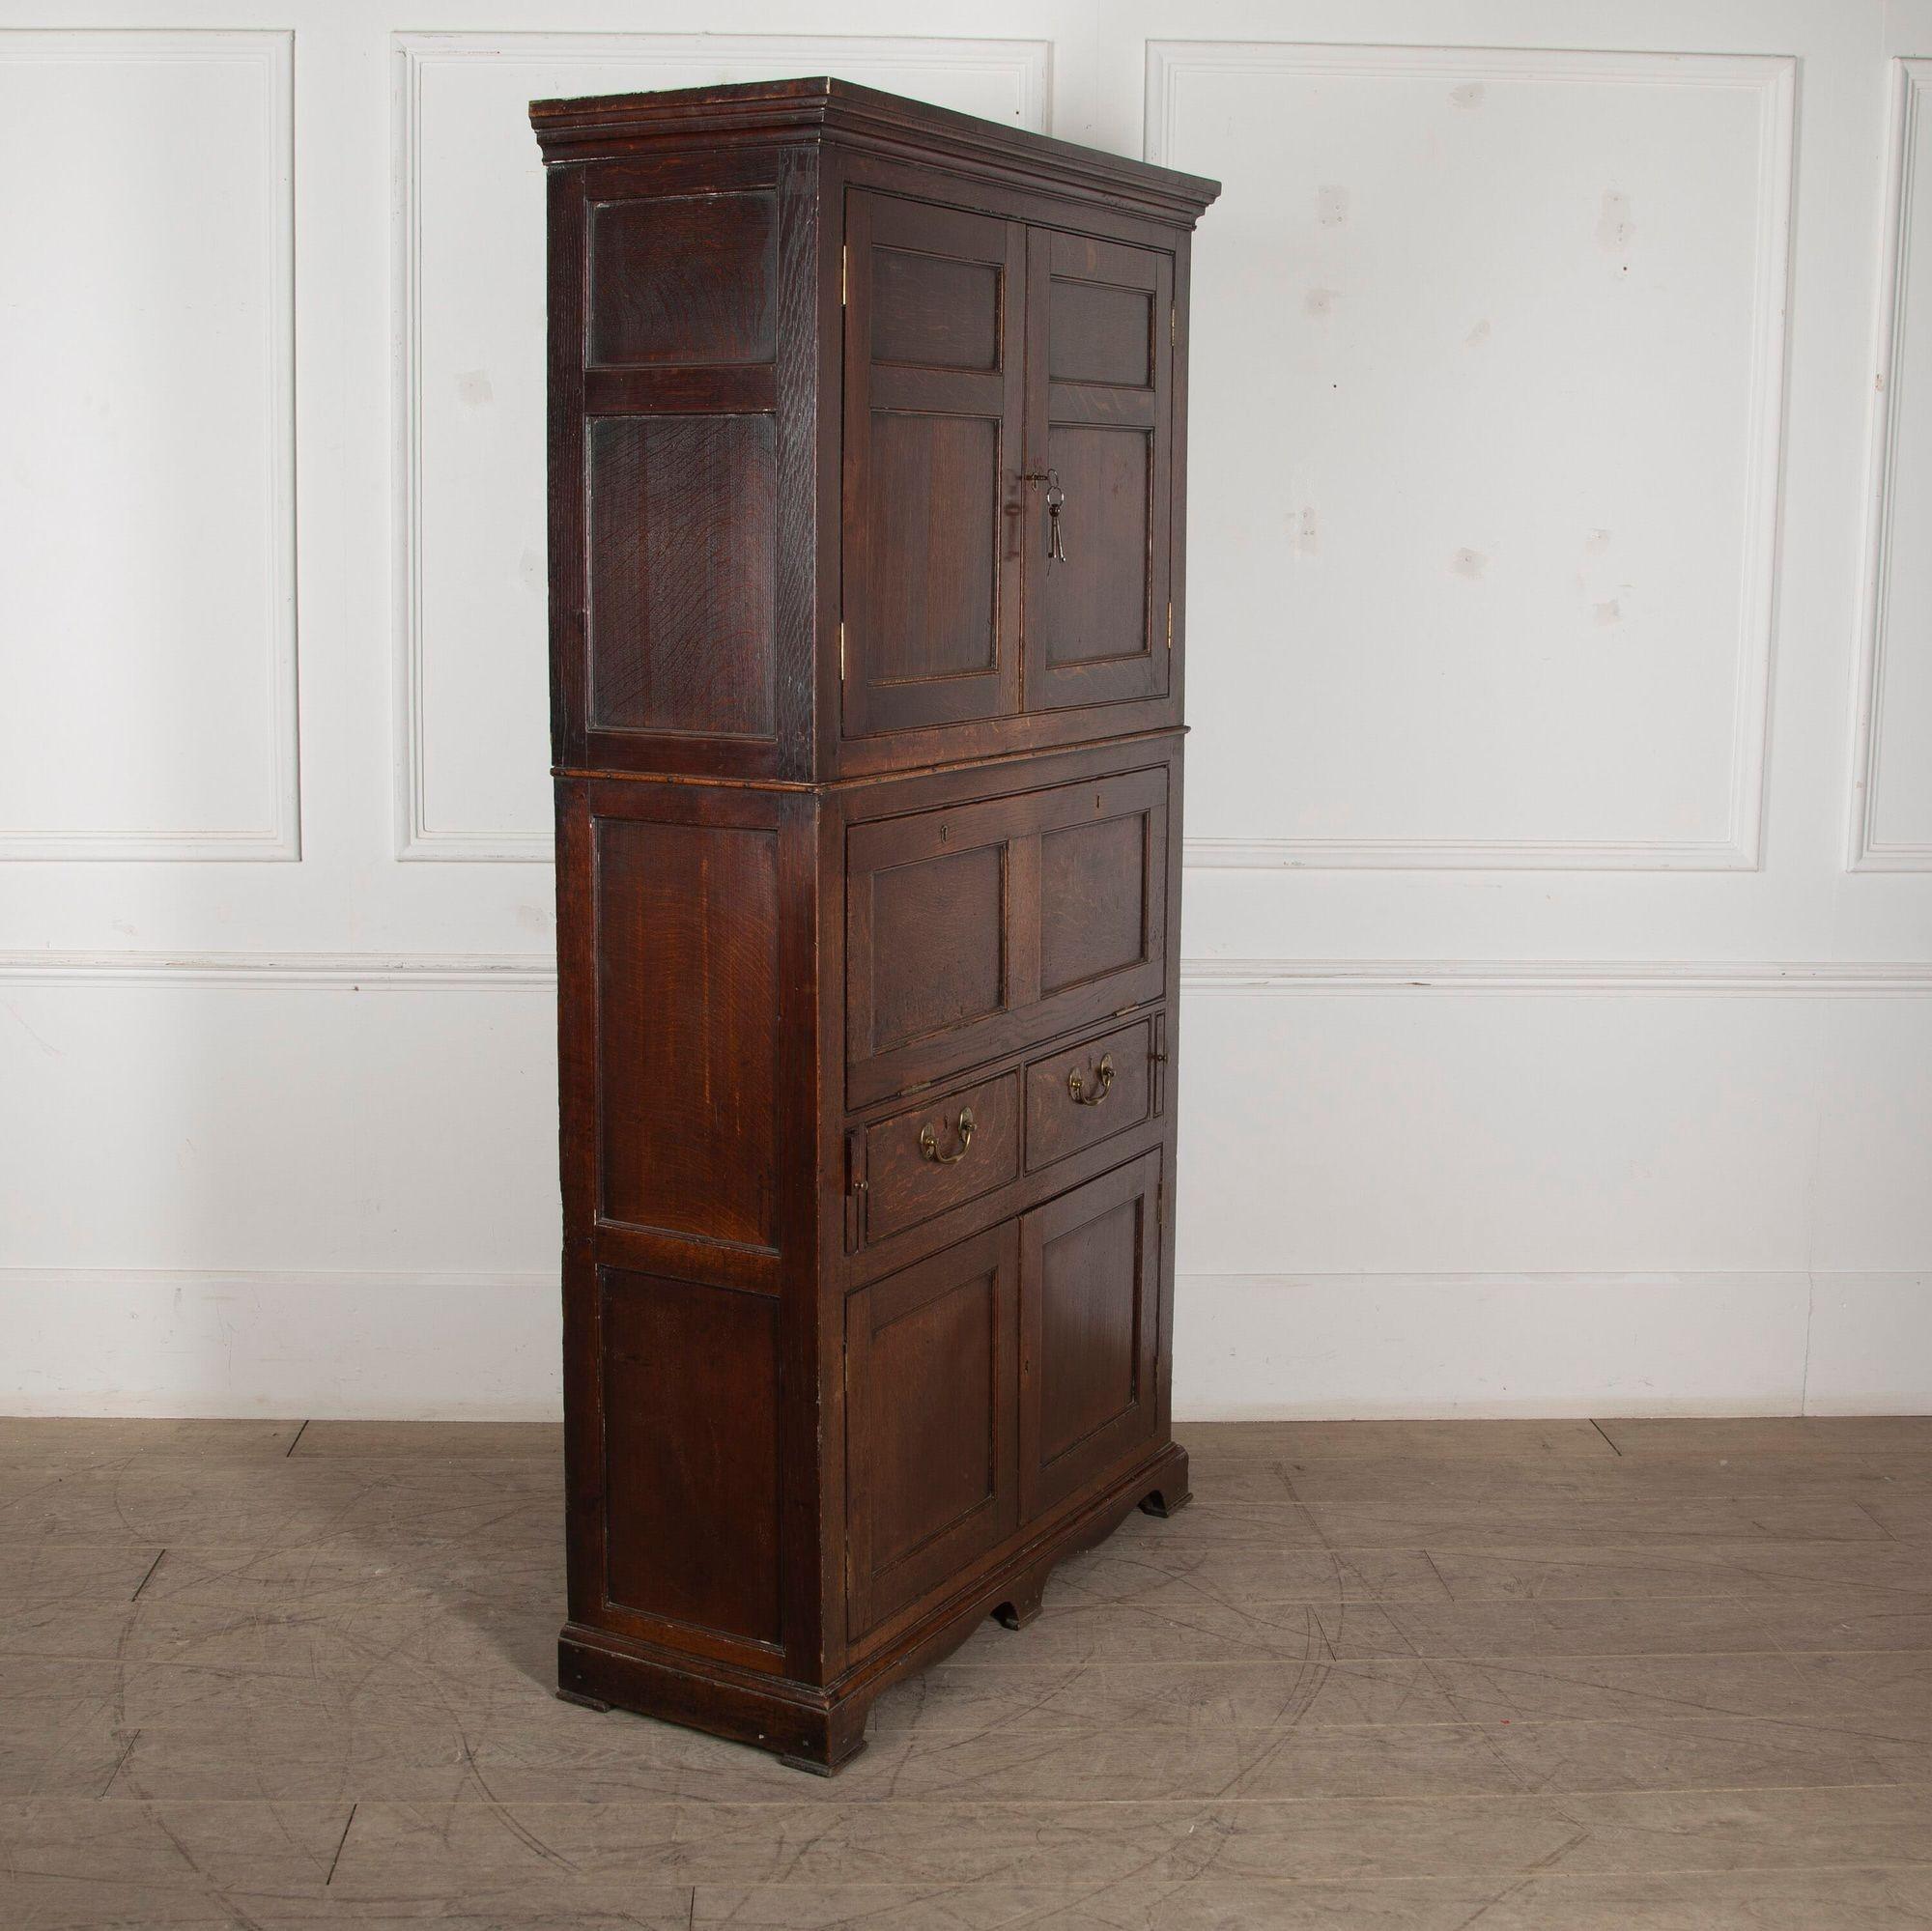 Truly wonderful early 19th Century George III oak secretaire estate cupboard.
This cupboard is of small proportions and was made by an accomplished cabinet maker.
In totally untouched condition, original handles, hinges, locks, keys, feet, and the